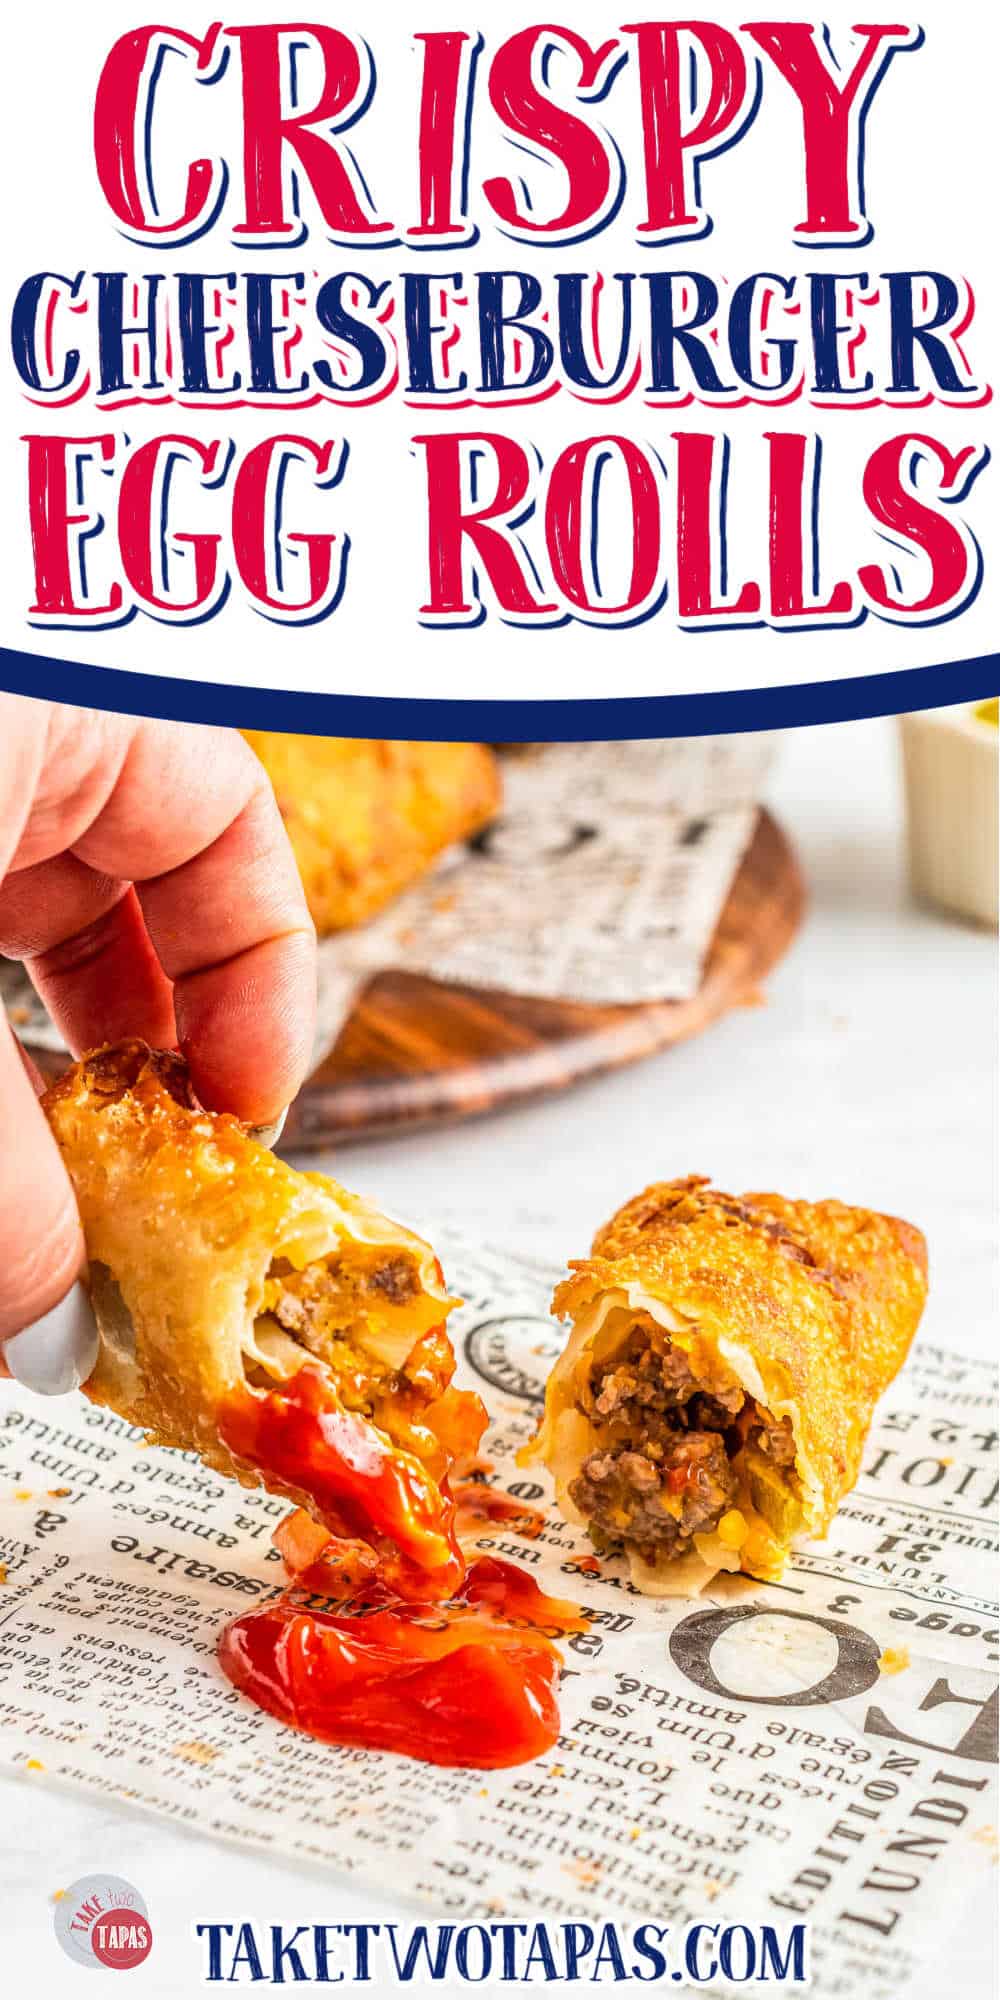 Egg rolls with minced beef and cheese filling on newspaper with the text "Crispy Cheeseburger Egg Rolls" on top. 